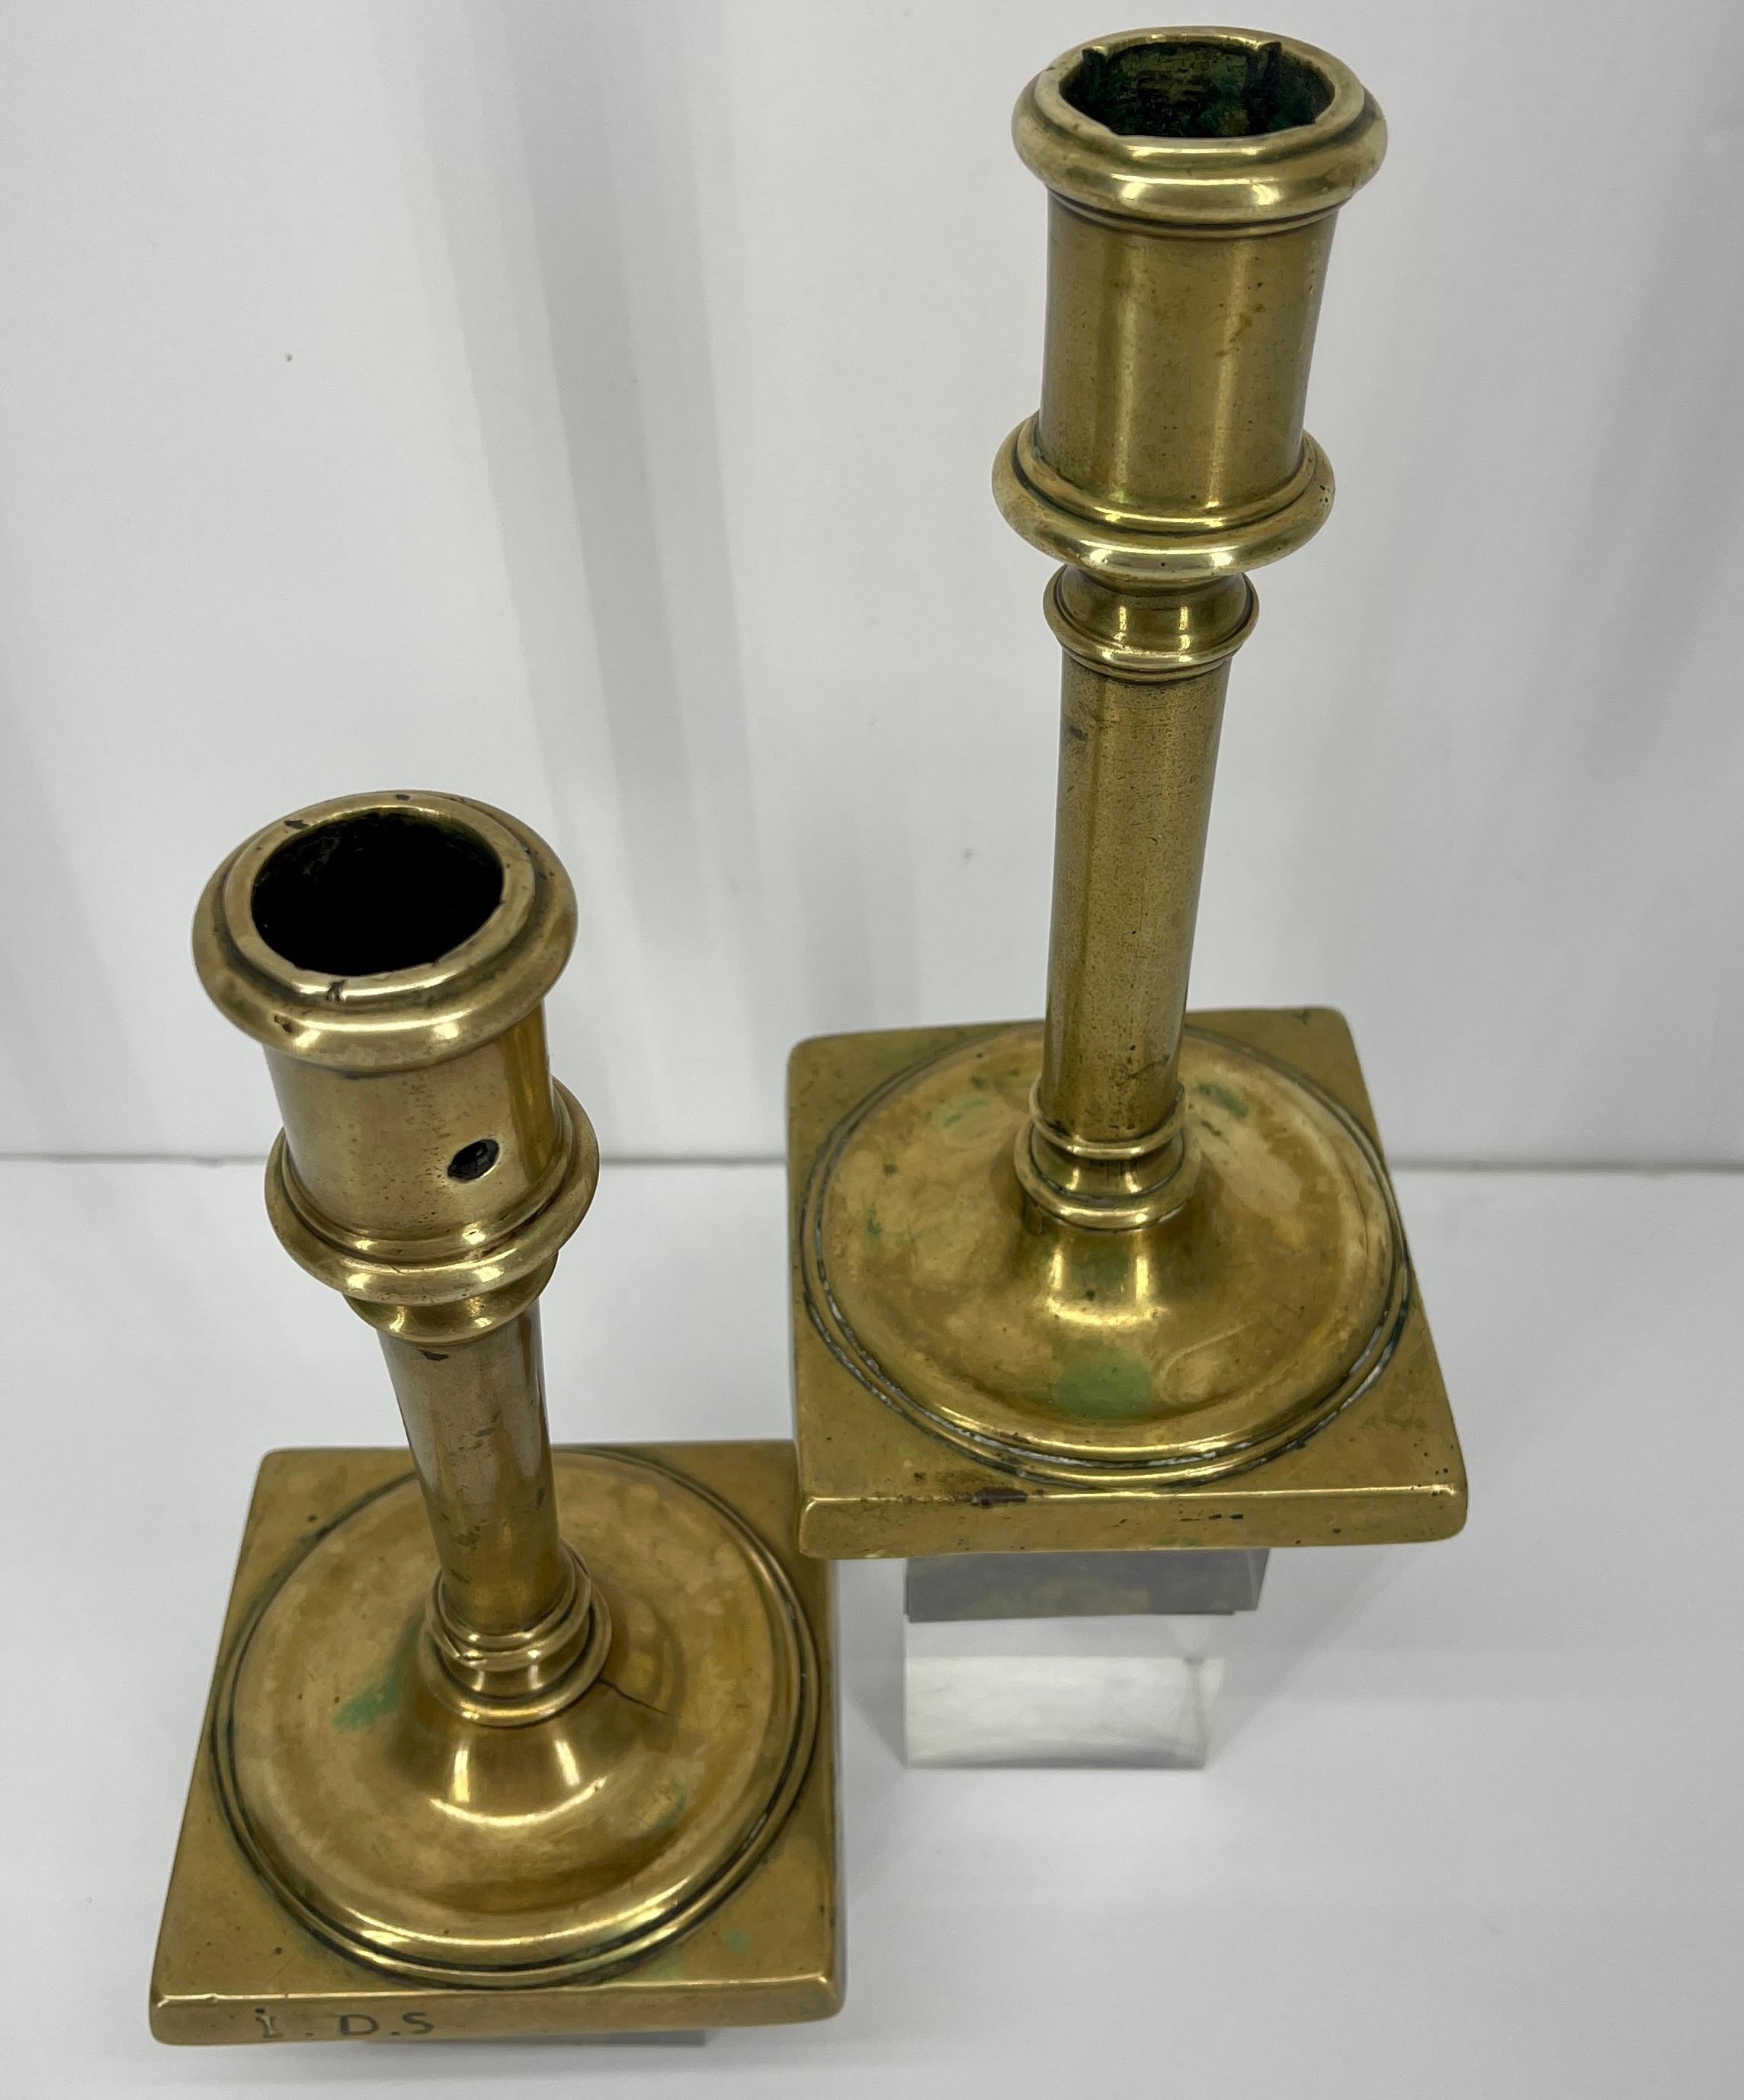 Hand-Crafted Pair of 18th Century French Brass Baroque Candlesticks